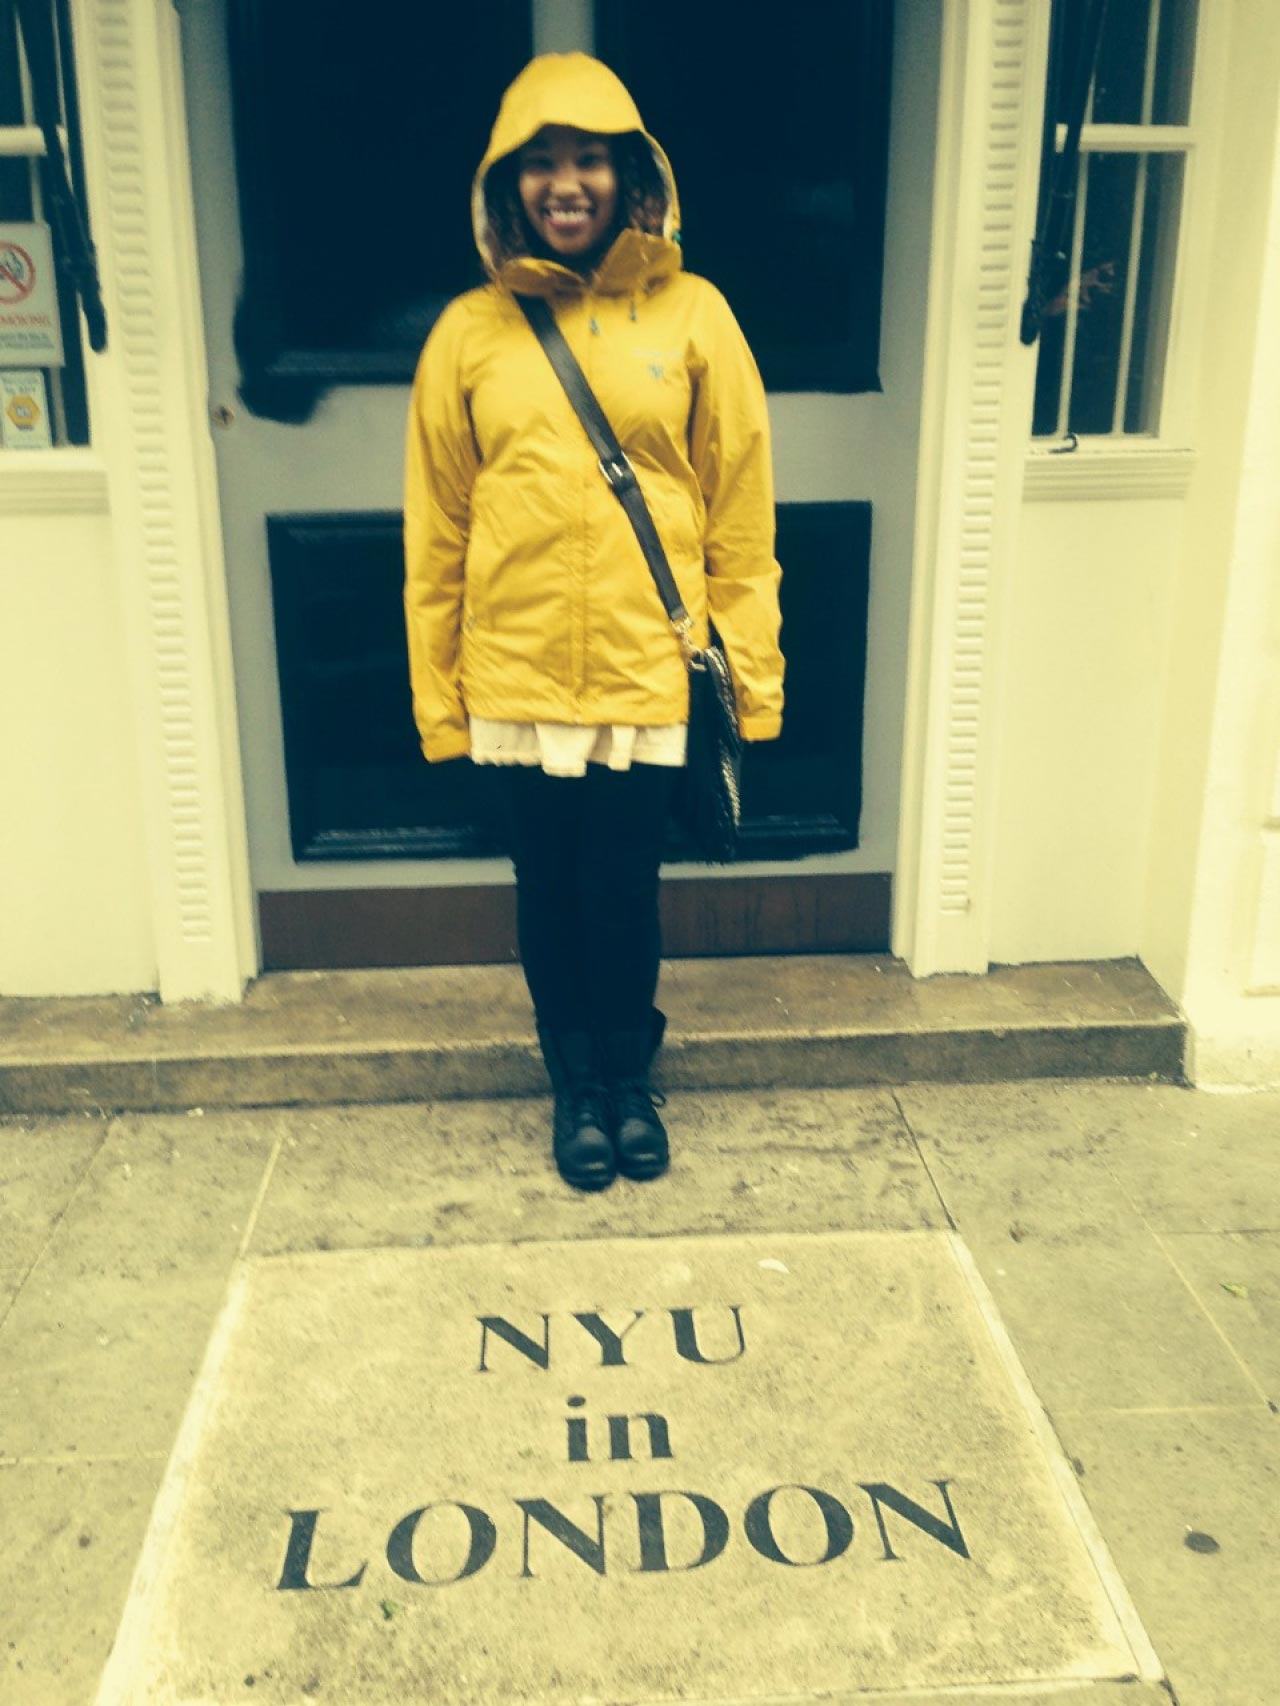 Taylor standing in front of the NYU in London sign